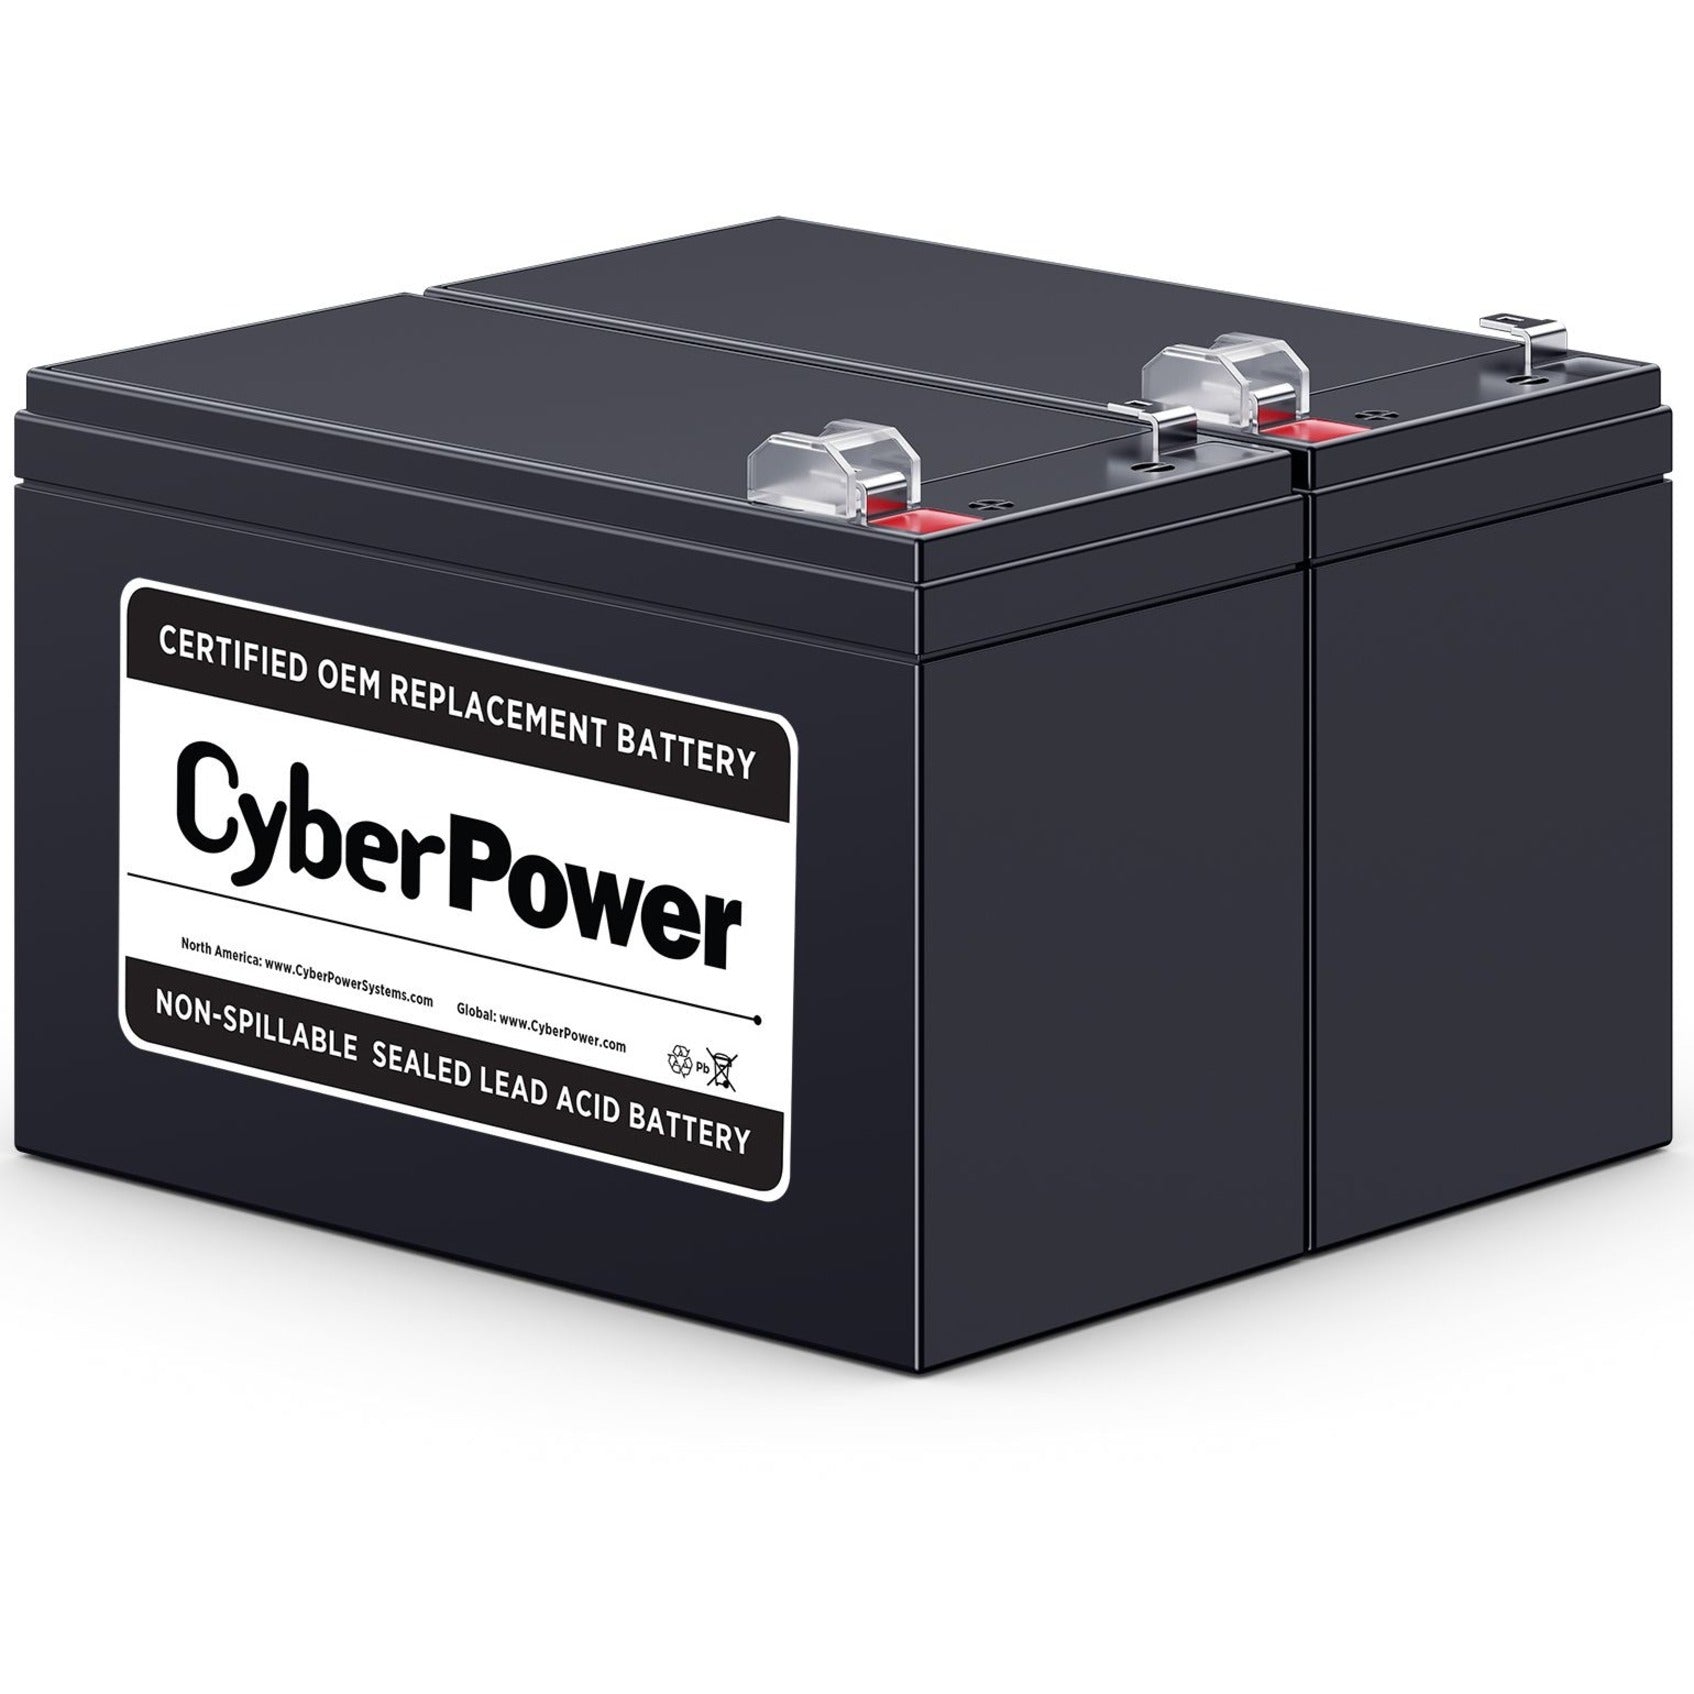 CyberPower RB1290X2 Replacement Battery Unit, 12V DC, 9000mAh, Lead Acid